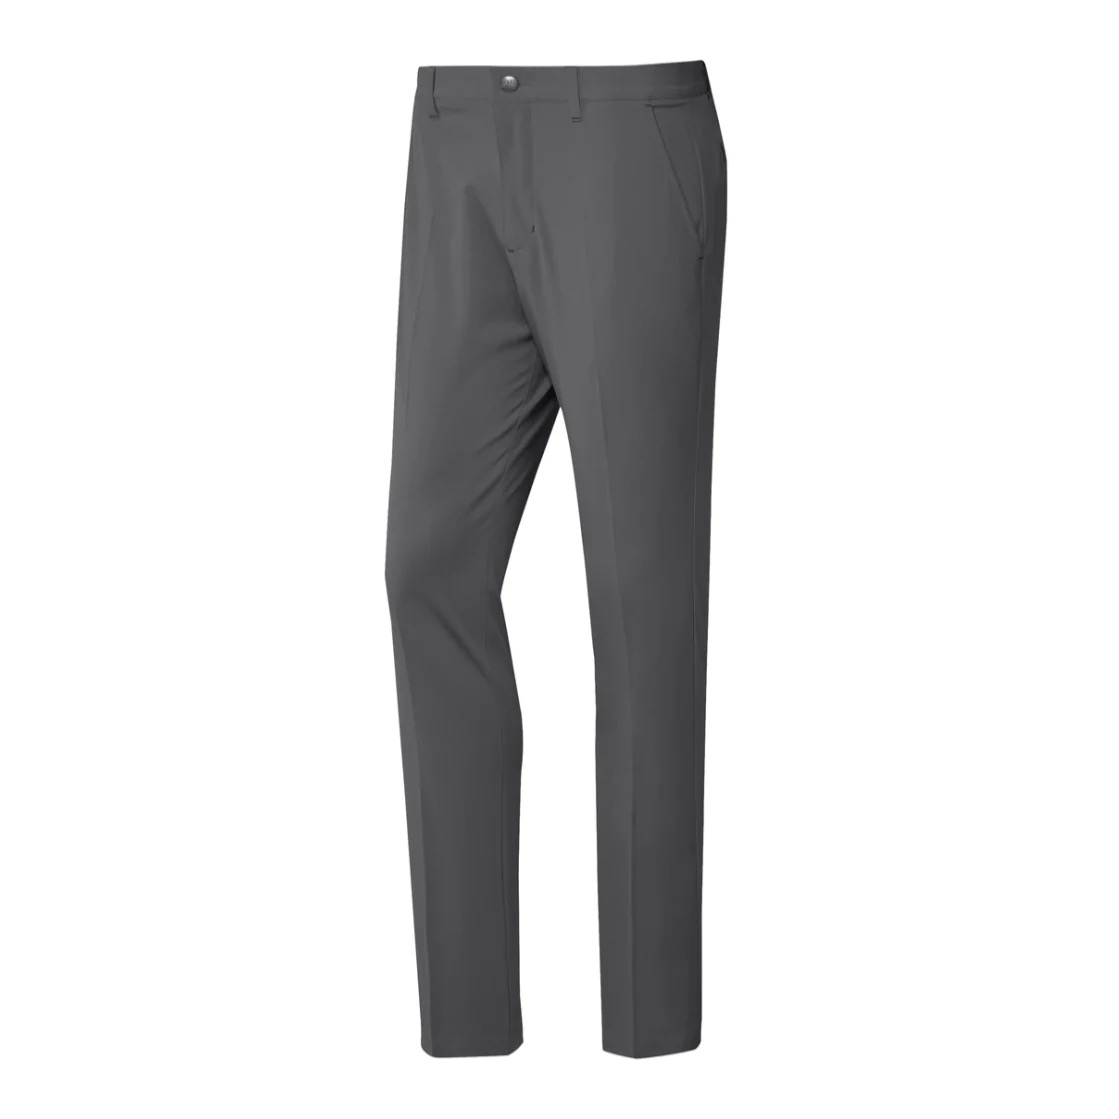 Adidas Ultimate Pant Tapered Grey